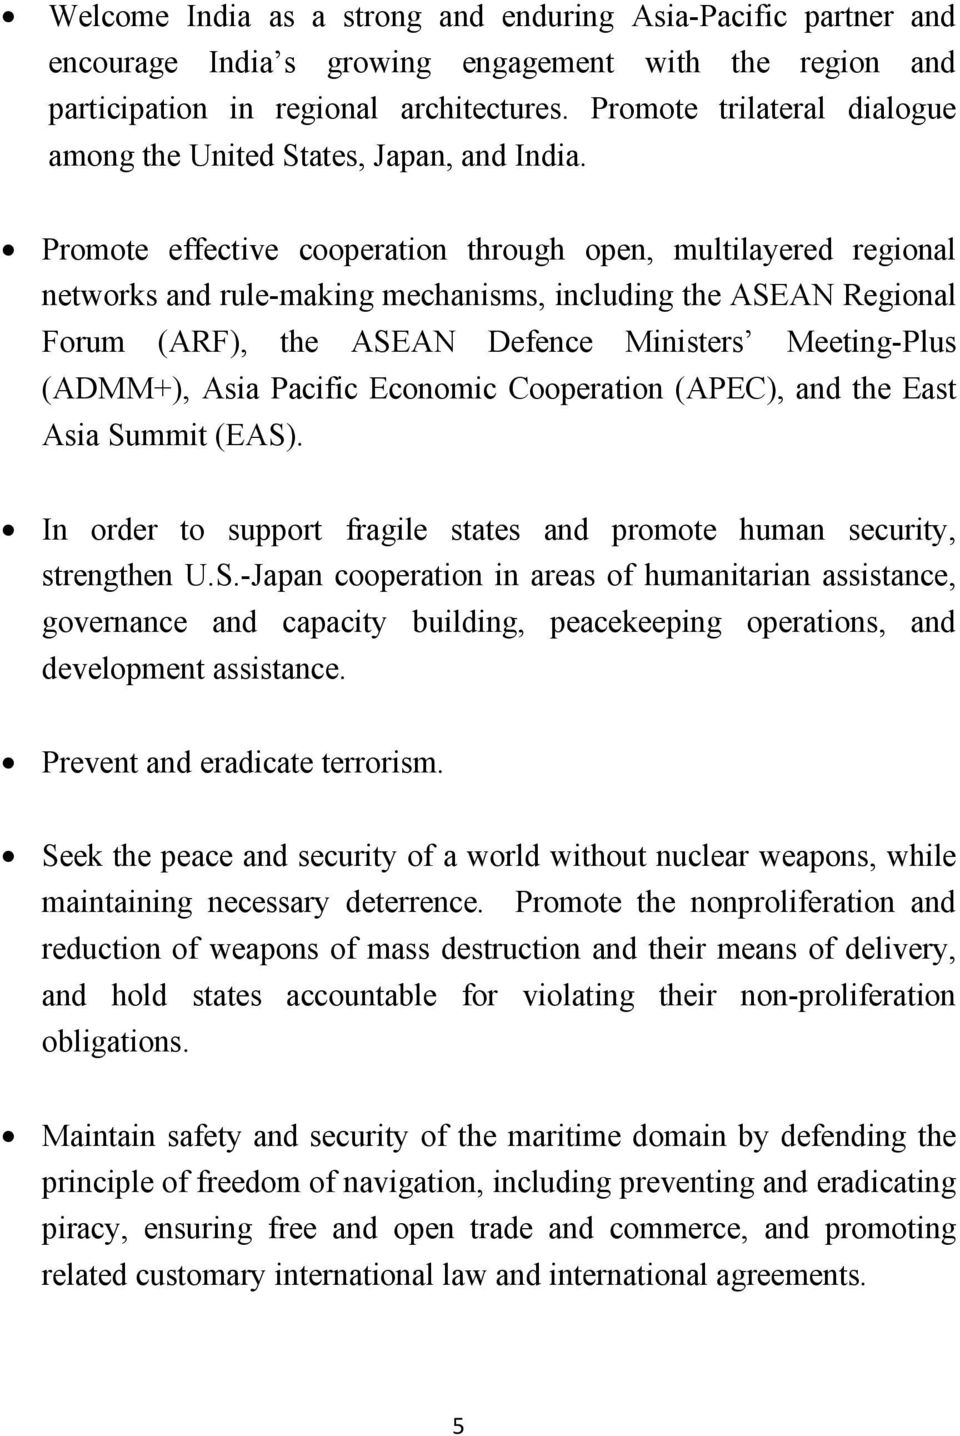 Promote effective cooperation through open, multilayered regional networks and rule-making mechanisms, including the ASEAN Regional Forum (ARF), the ASEAN Defence Ministers Meeting-Plus (ADMM+), Asia